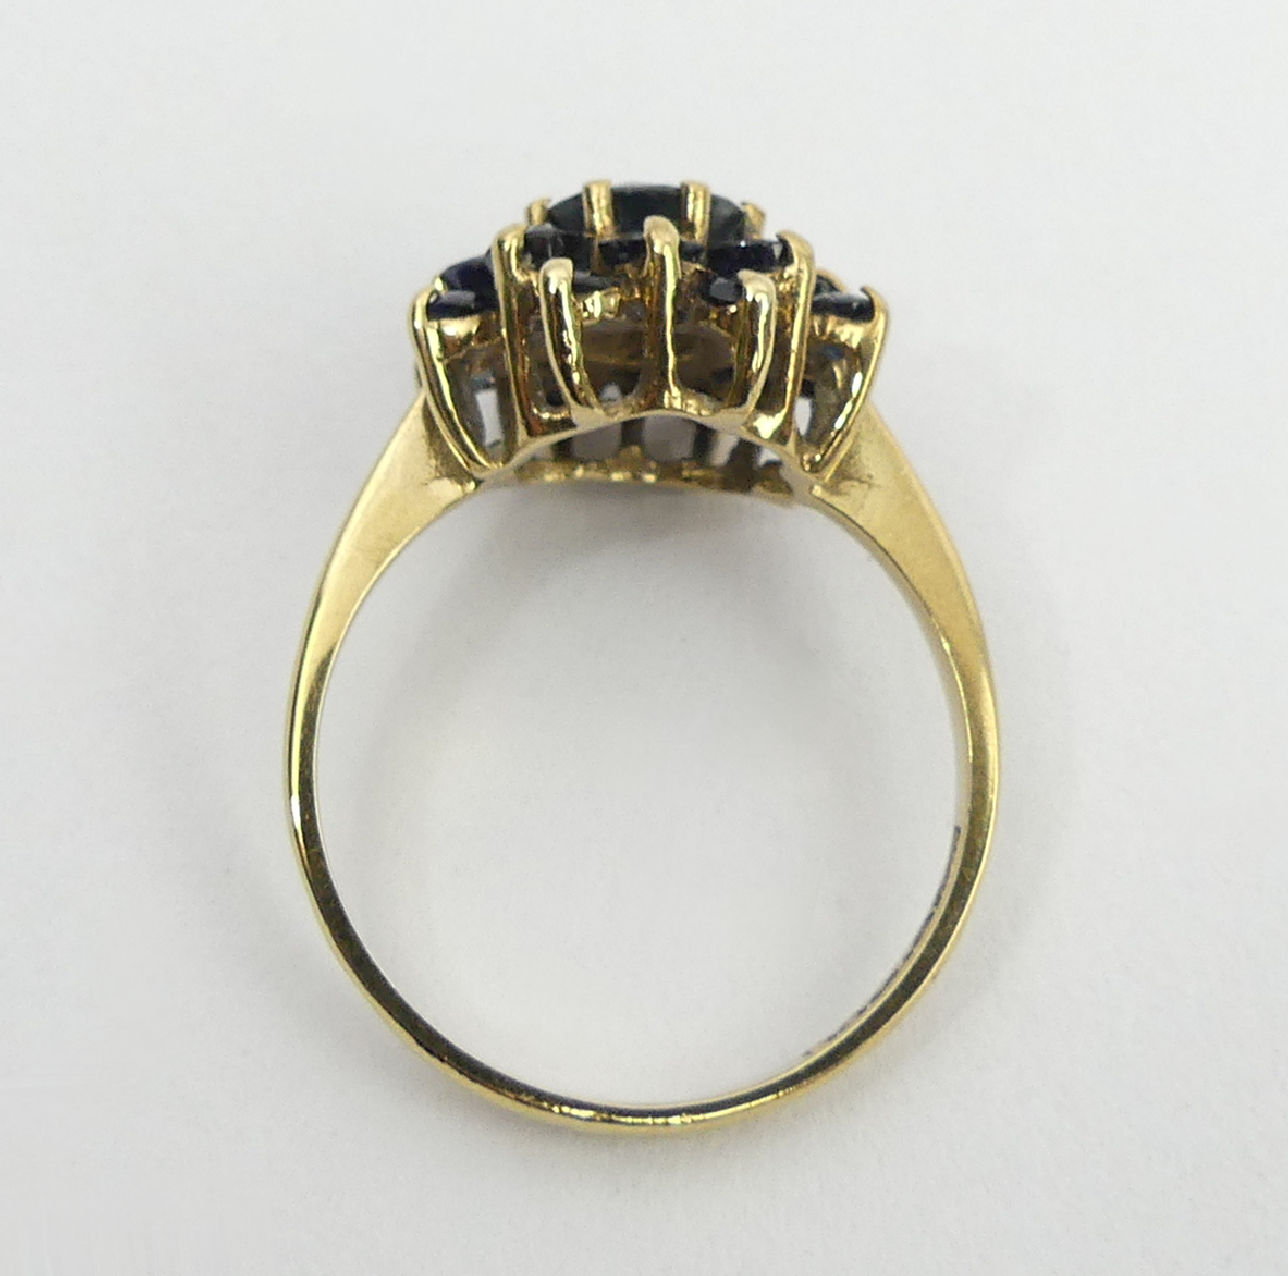 9ct gold sapphire cluster ring, Birm. 1980, 3.4 grams, 14mm, size Q. UK postage £12 - Image 4 of 6